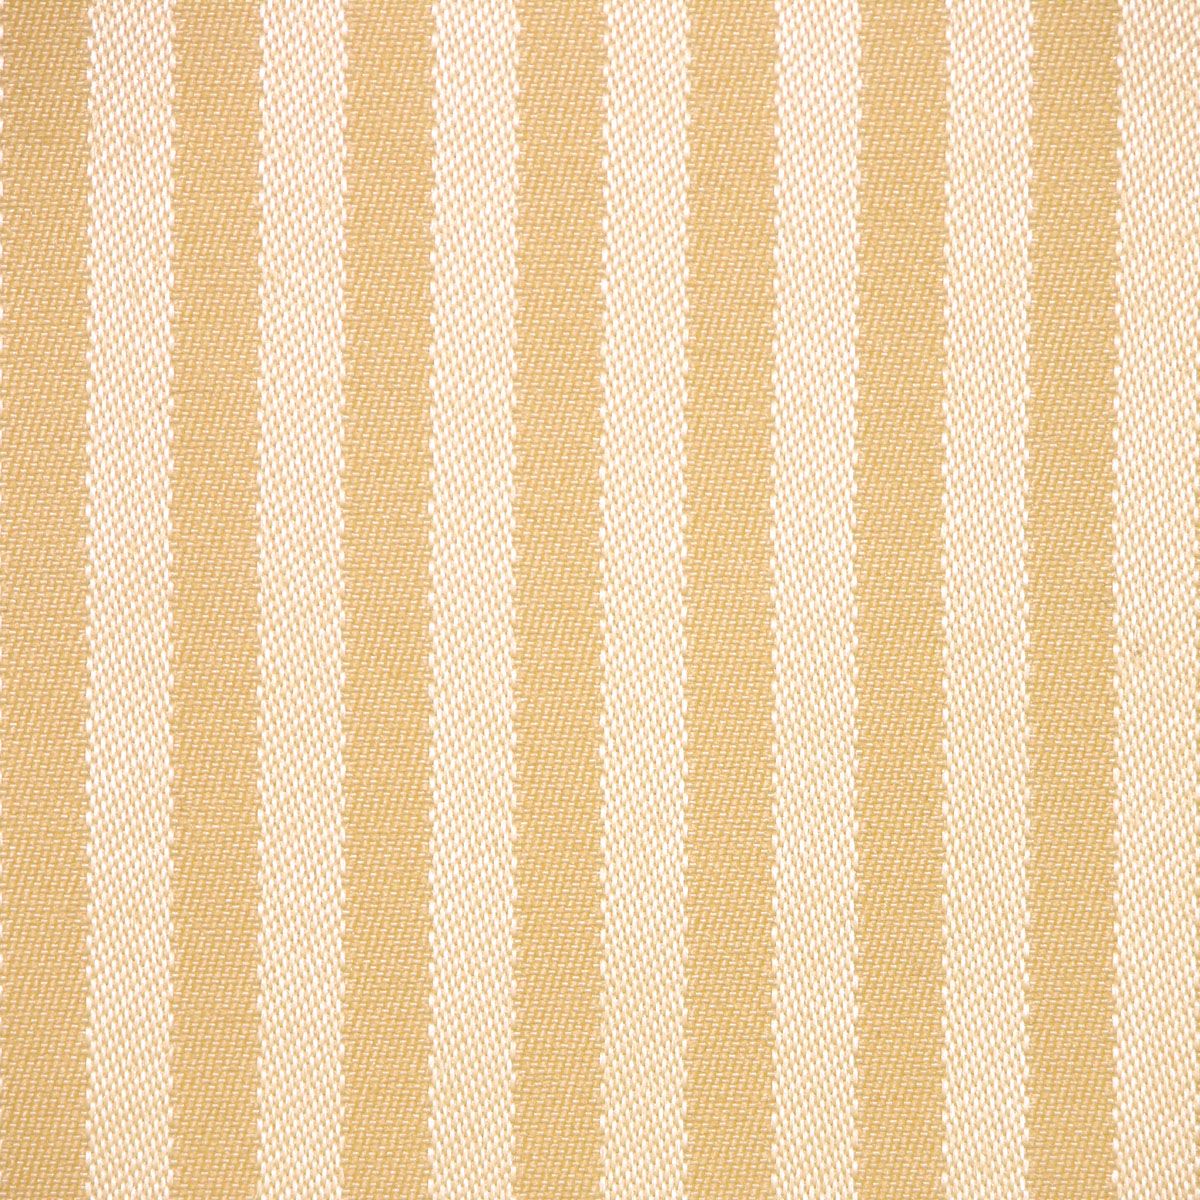 Davenport fabric in dune color - pattern number WR 52492244 - by Scalamandre in the Old World Weavers collection